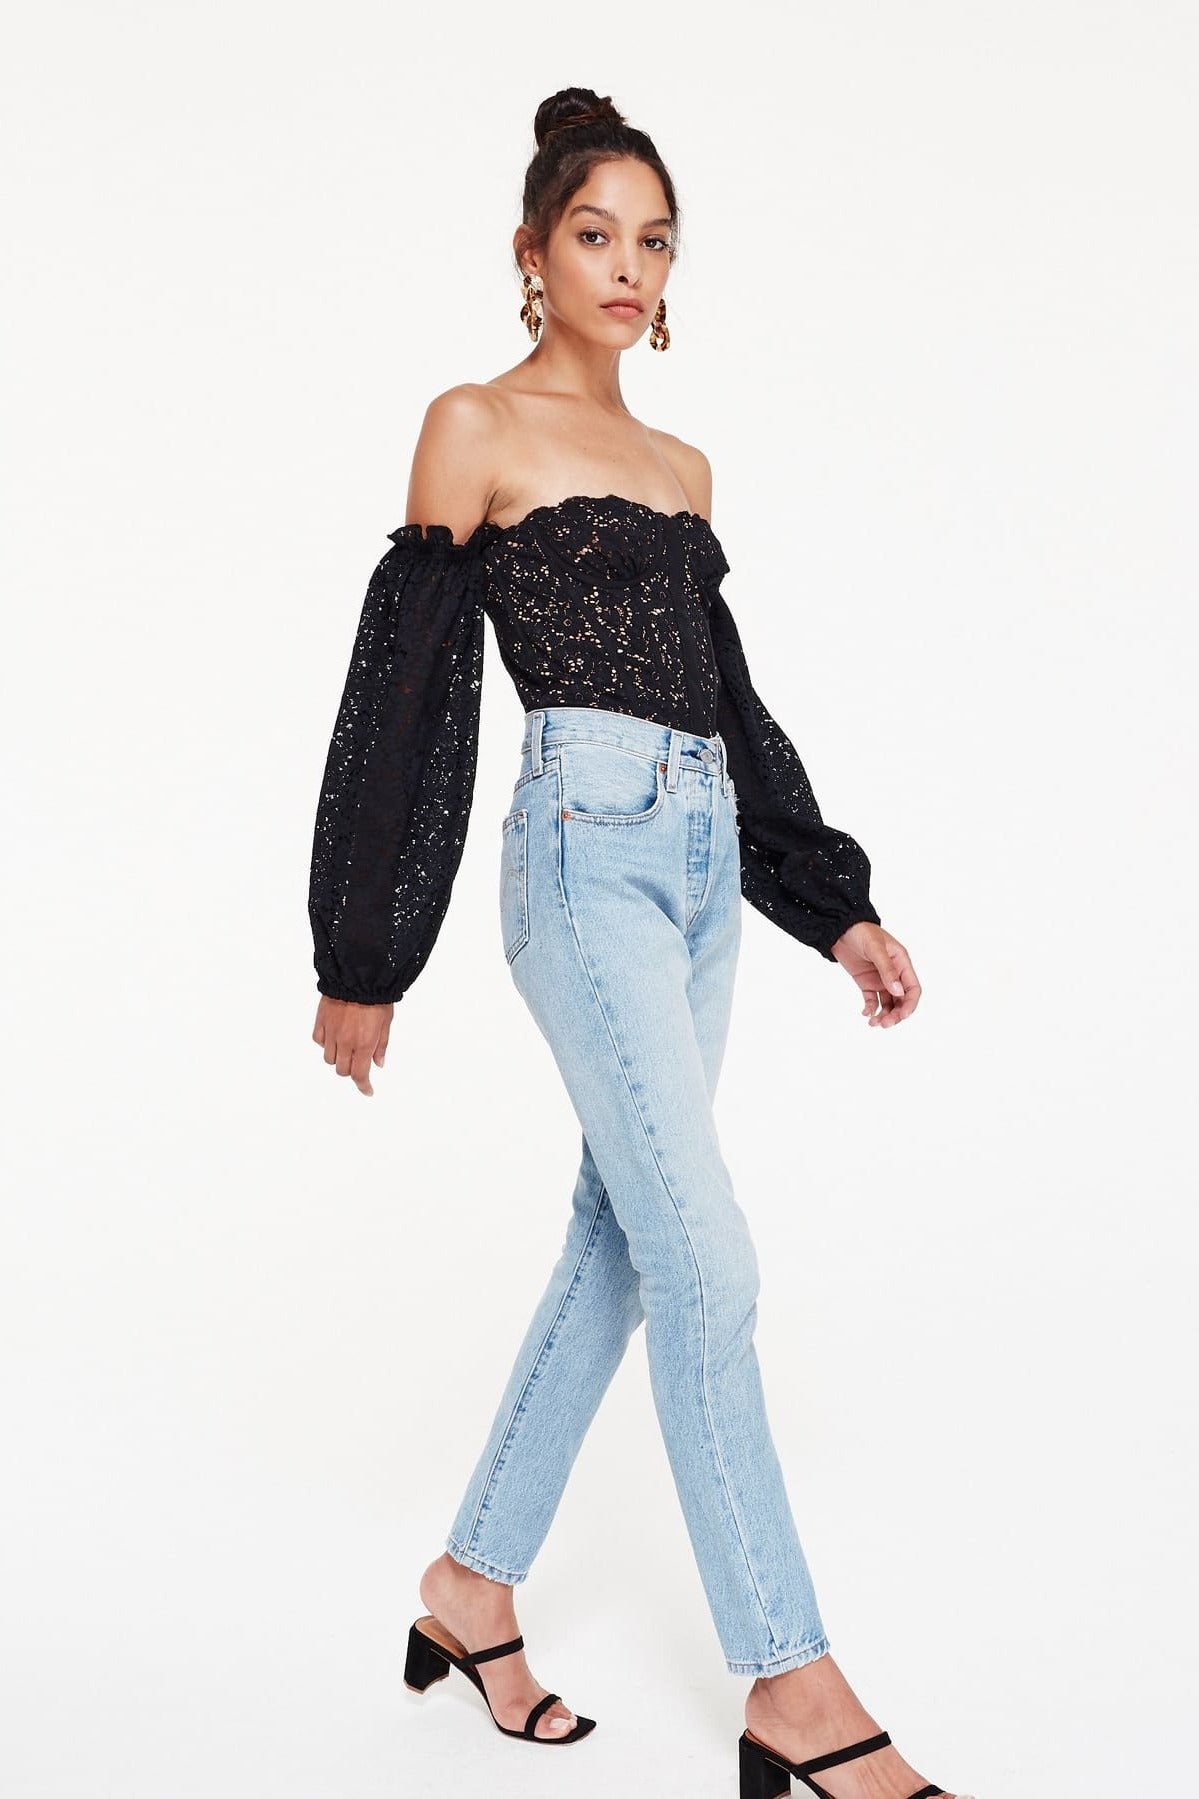 Black Off Shoulder Lace Puffed Sleeve Top Shirt